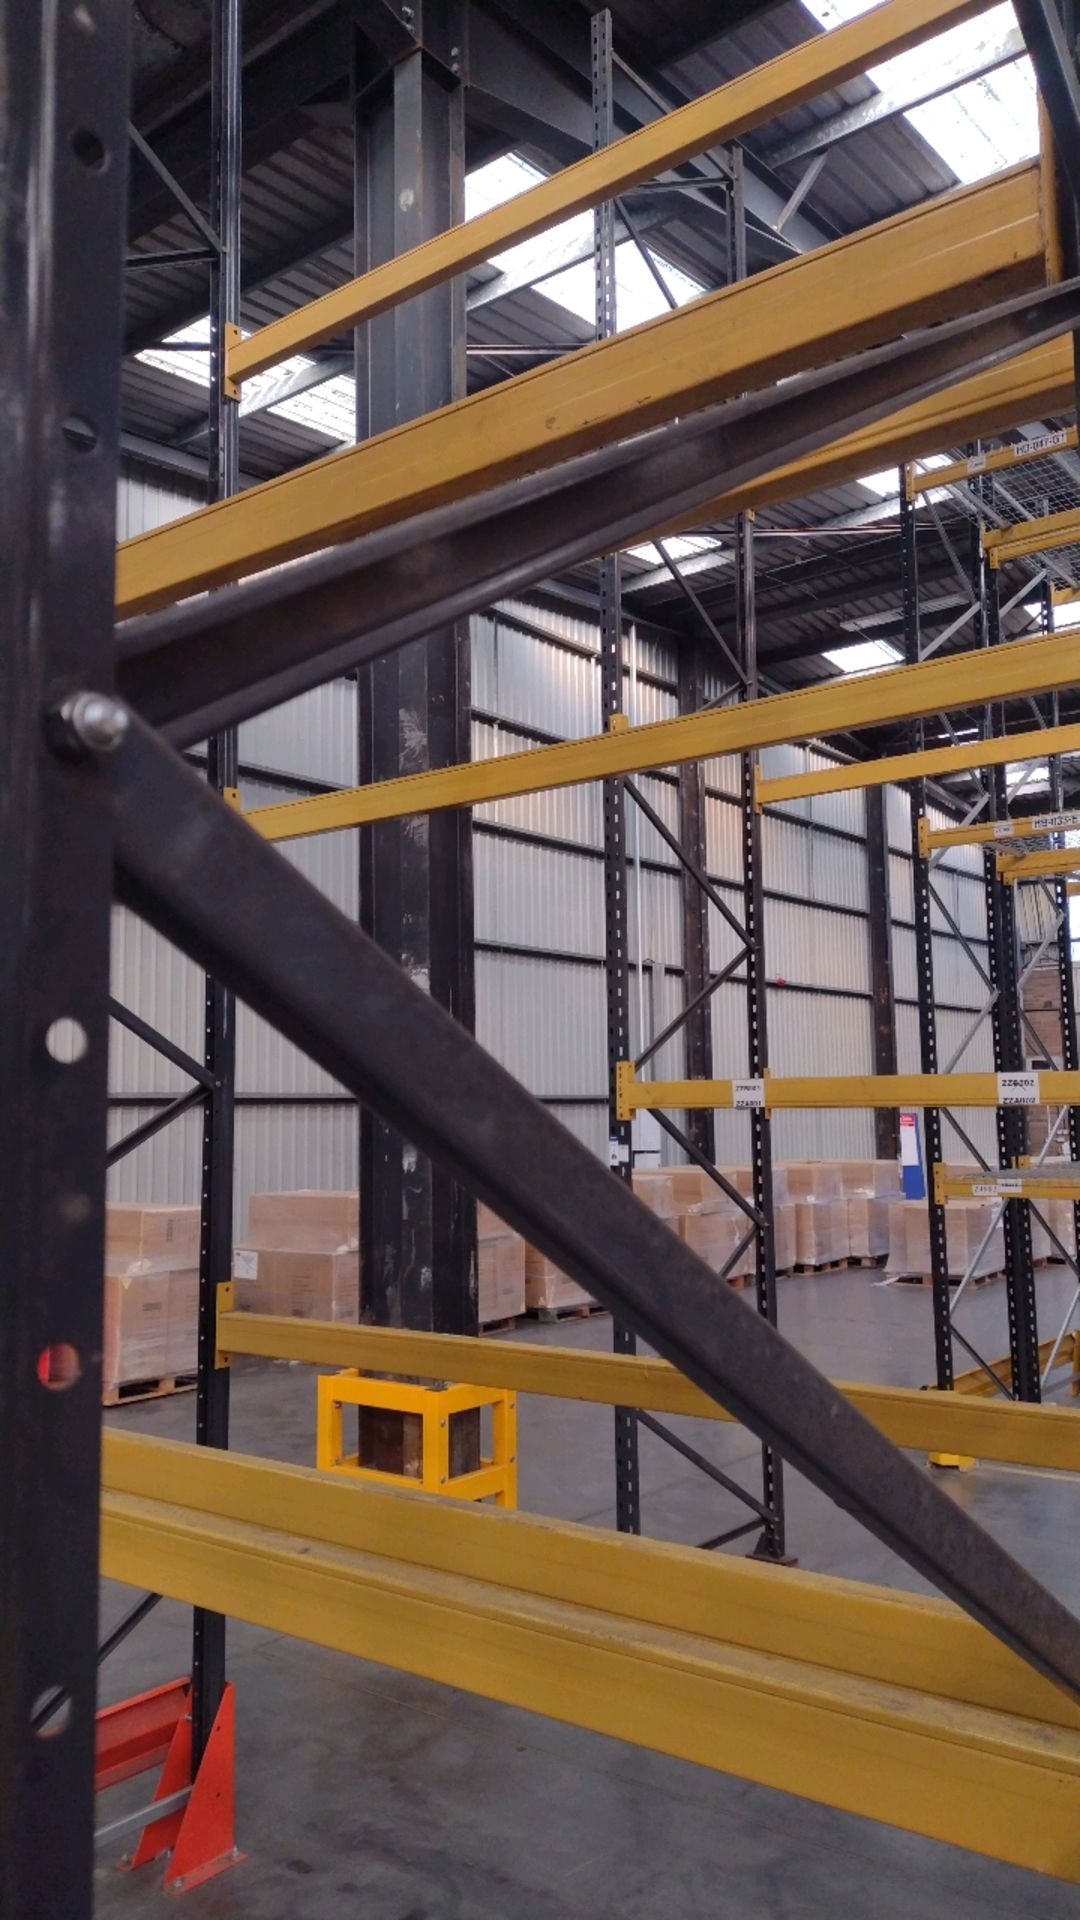 40 Bays Of Back To Back Boltless Industrial Pallet Racking - Image 4 of 10